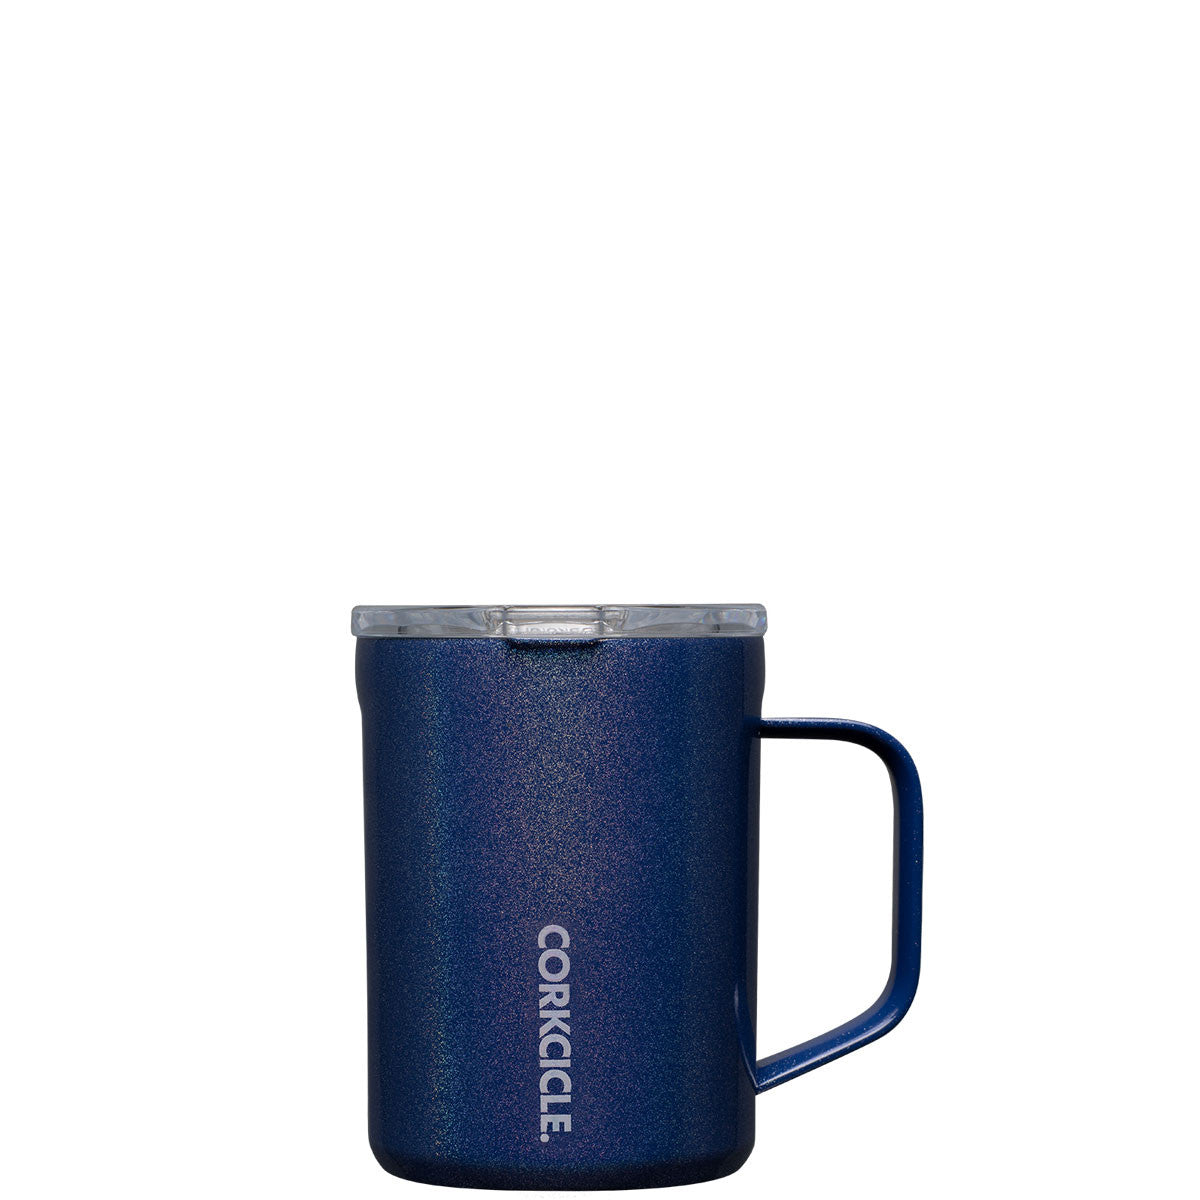 Midnight Magic 16 oz Stainless Steel Travel Mug by Corkcicle